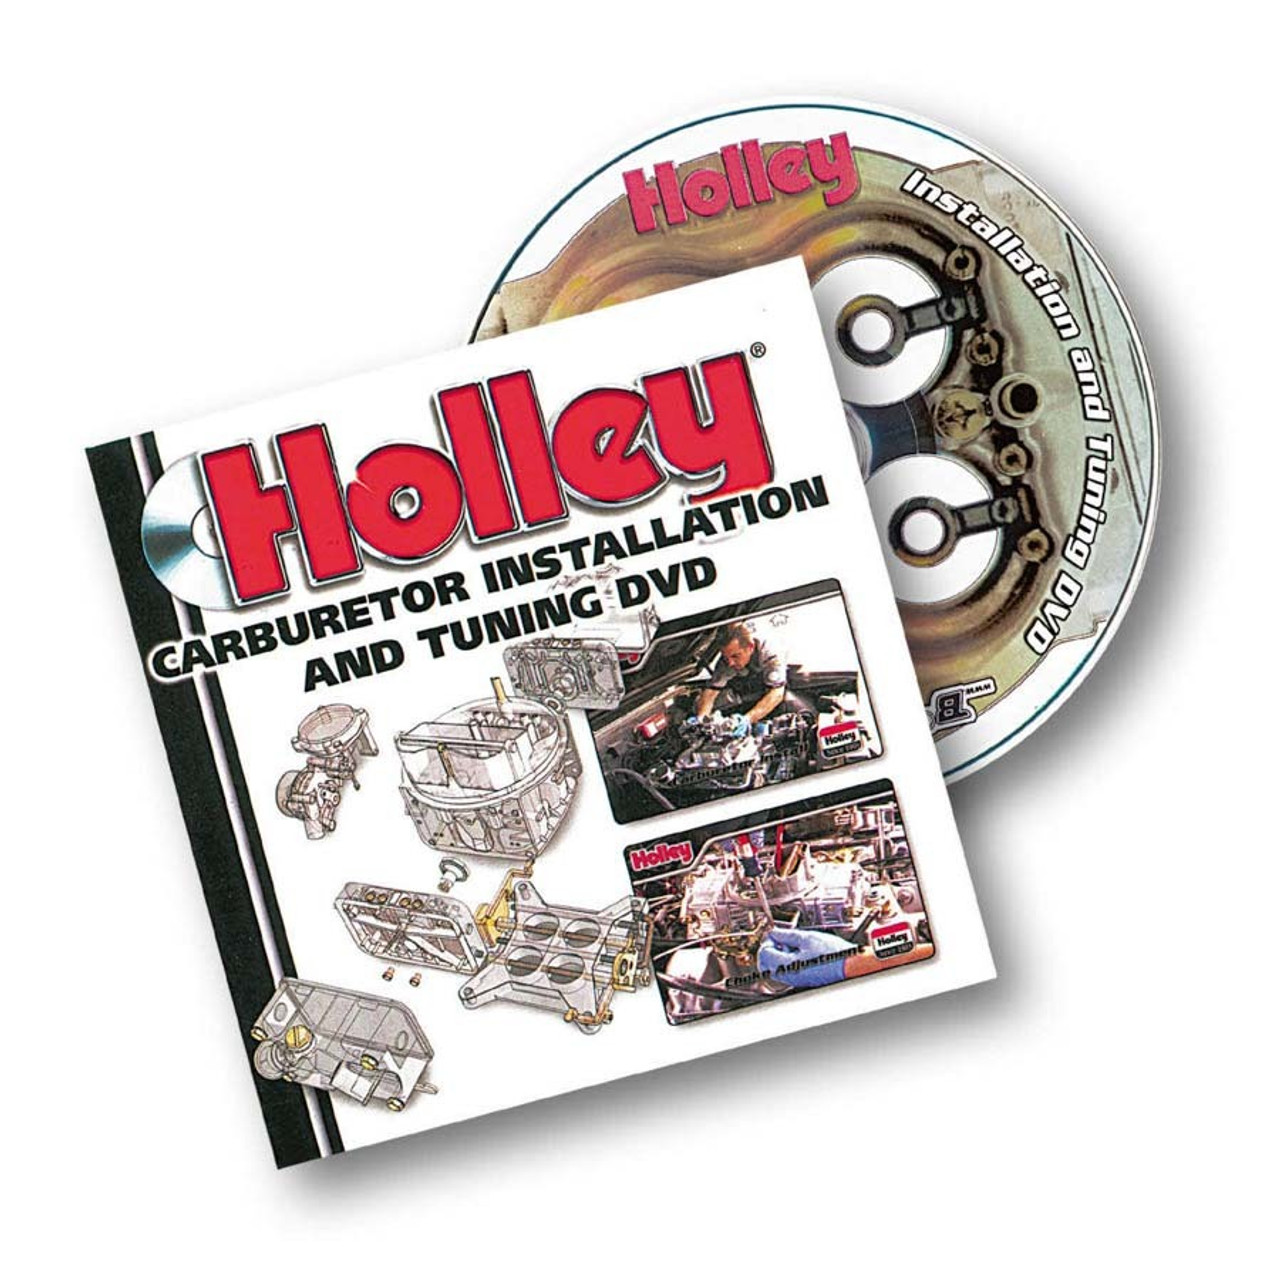 Carb. Installation & Tuning DVD Video